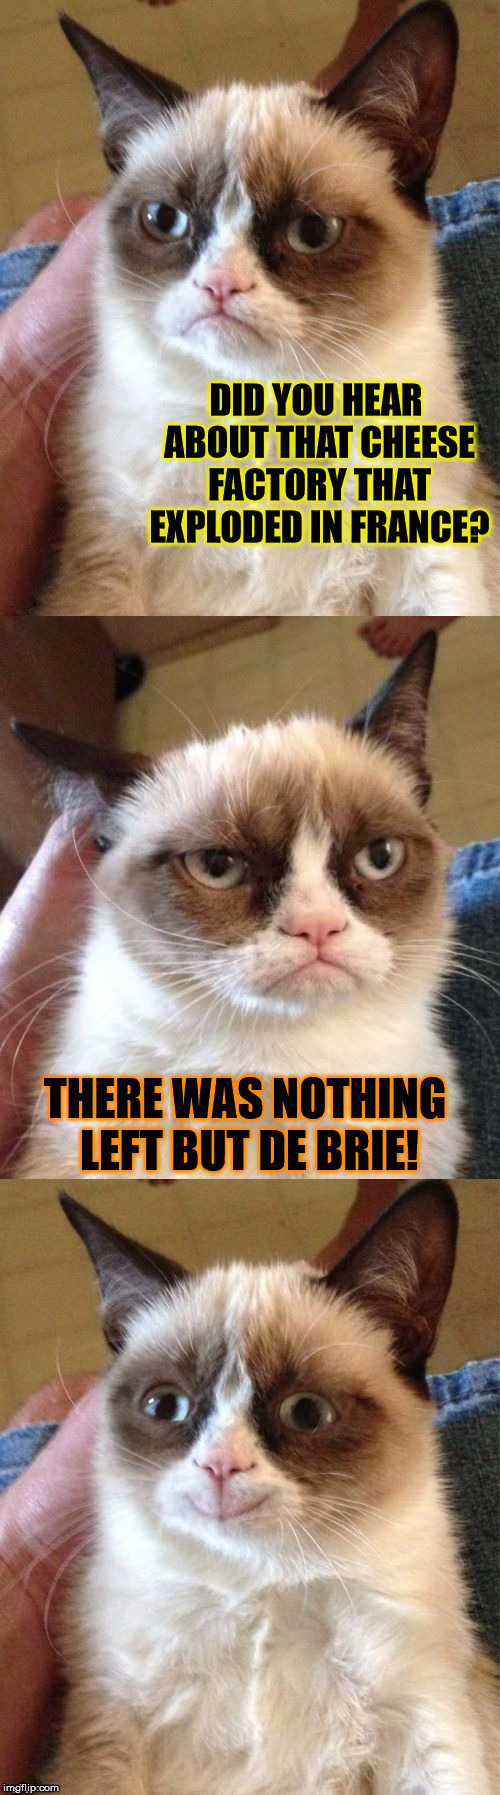 Those are PUNchy news... | DID YOU HEAR ABOUT THAT CHEESE FACTORY THAT EXPLODED IN FRANCE? THERE WAS NOTHING LEFT BUT DE BRIE! | image tagged in bad pun grumpy cat,memes,funny,puns,cheese,factory | made w/ Imgflip meme maker